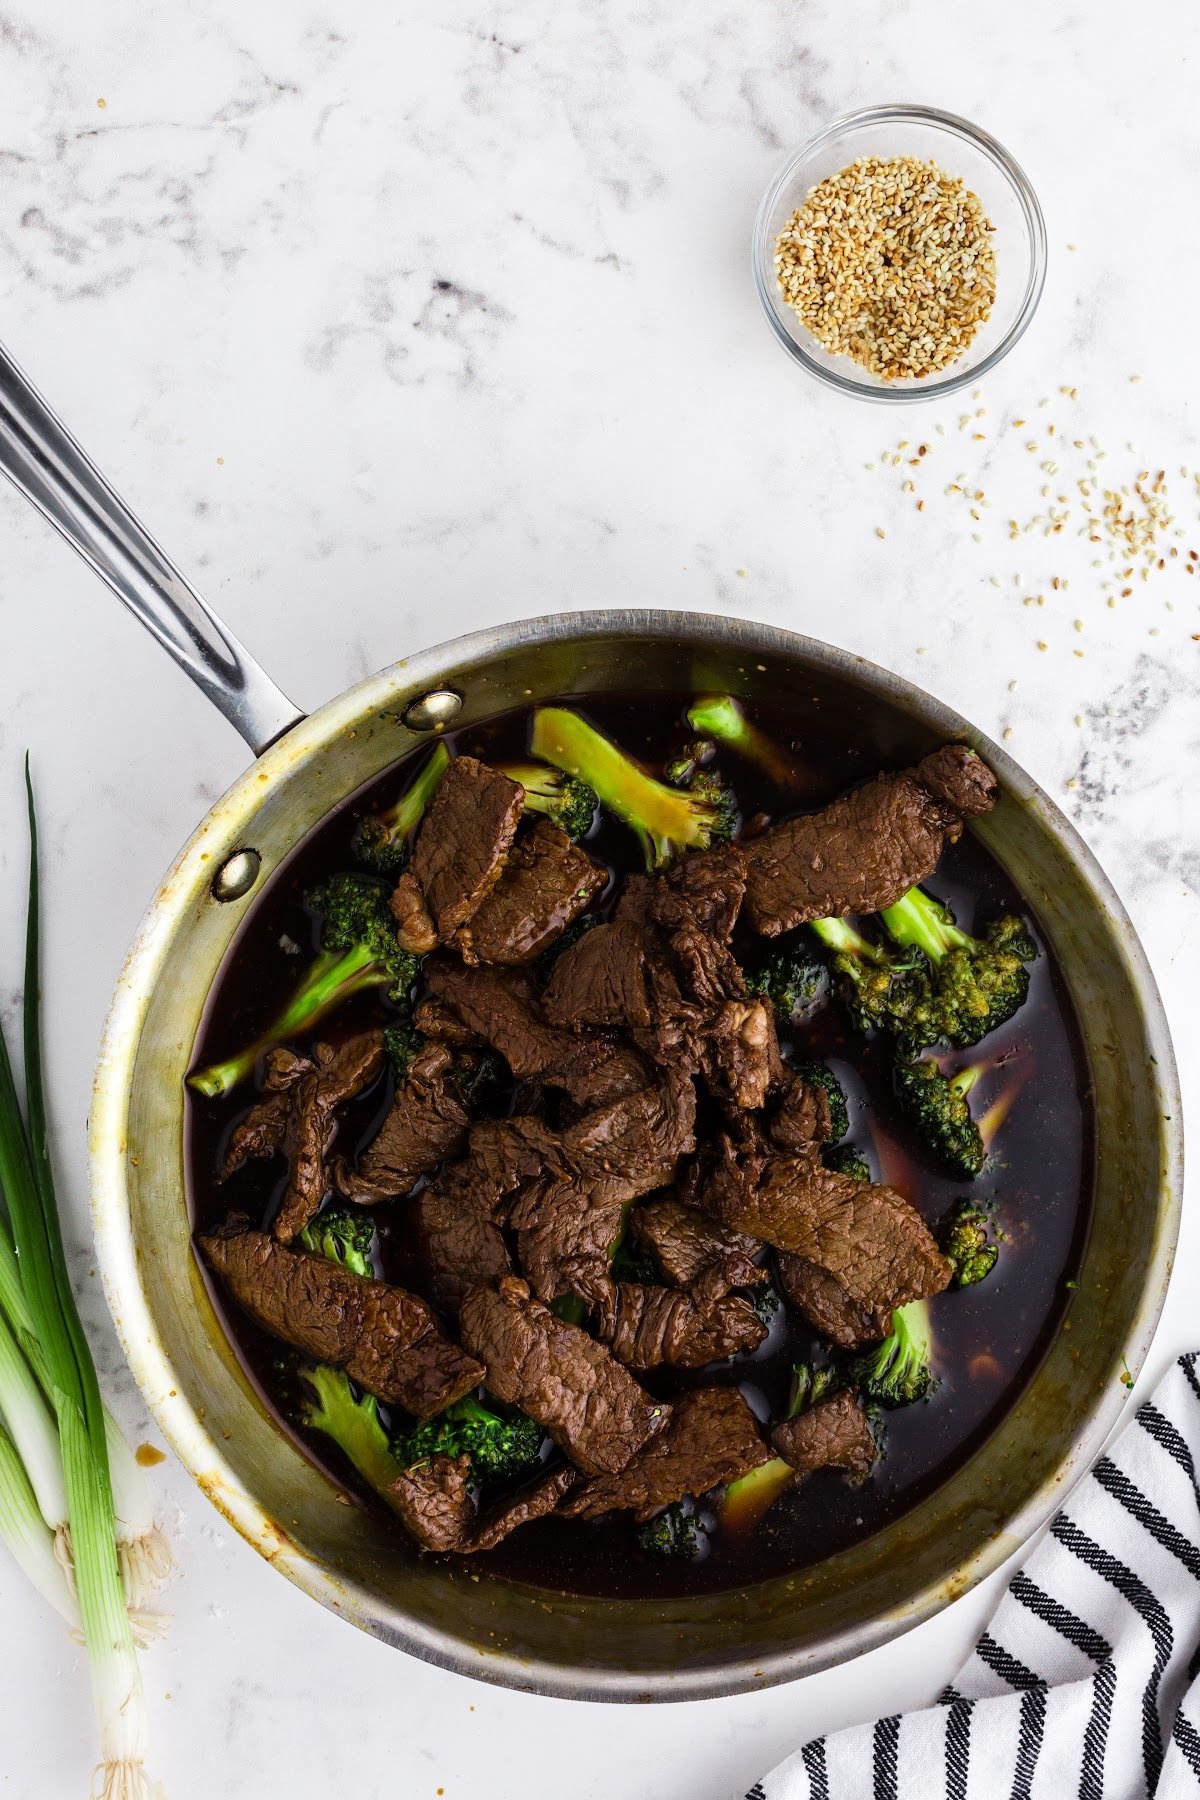 Seared beef added into skillet with Panda Express beef and broccoli.